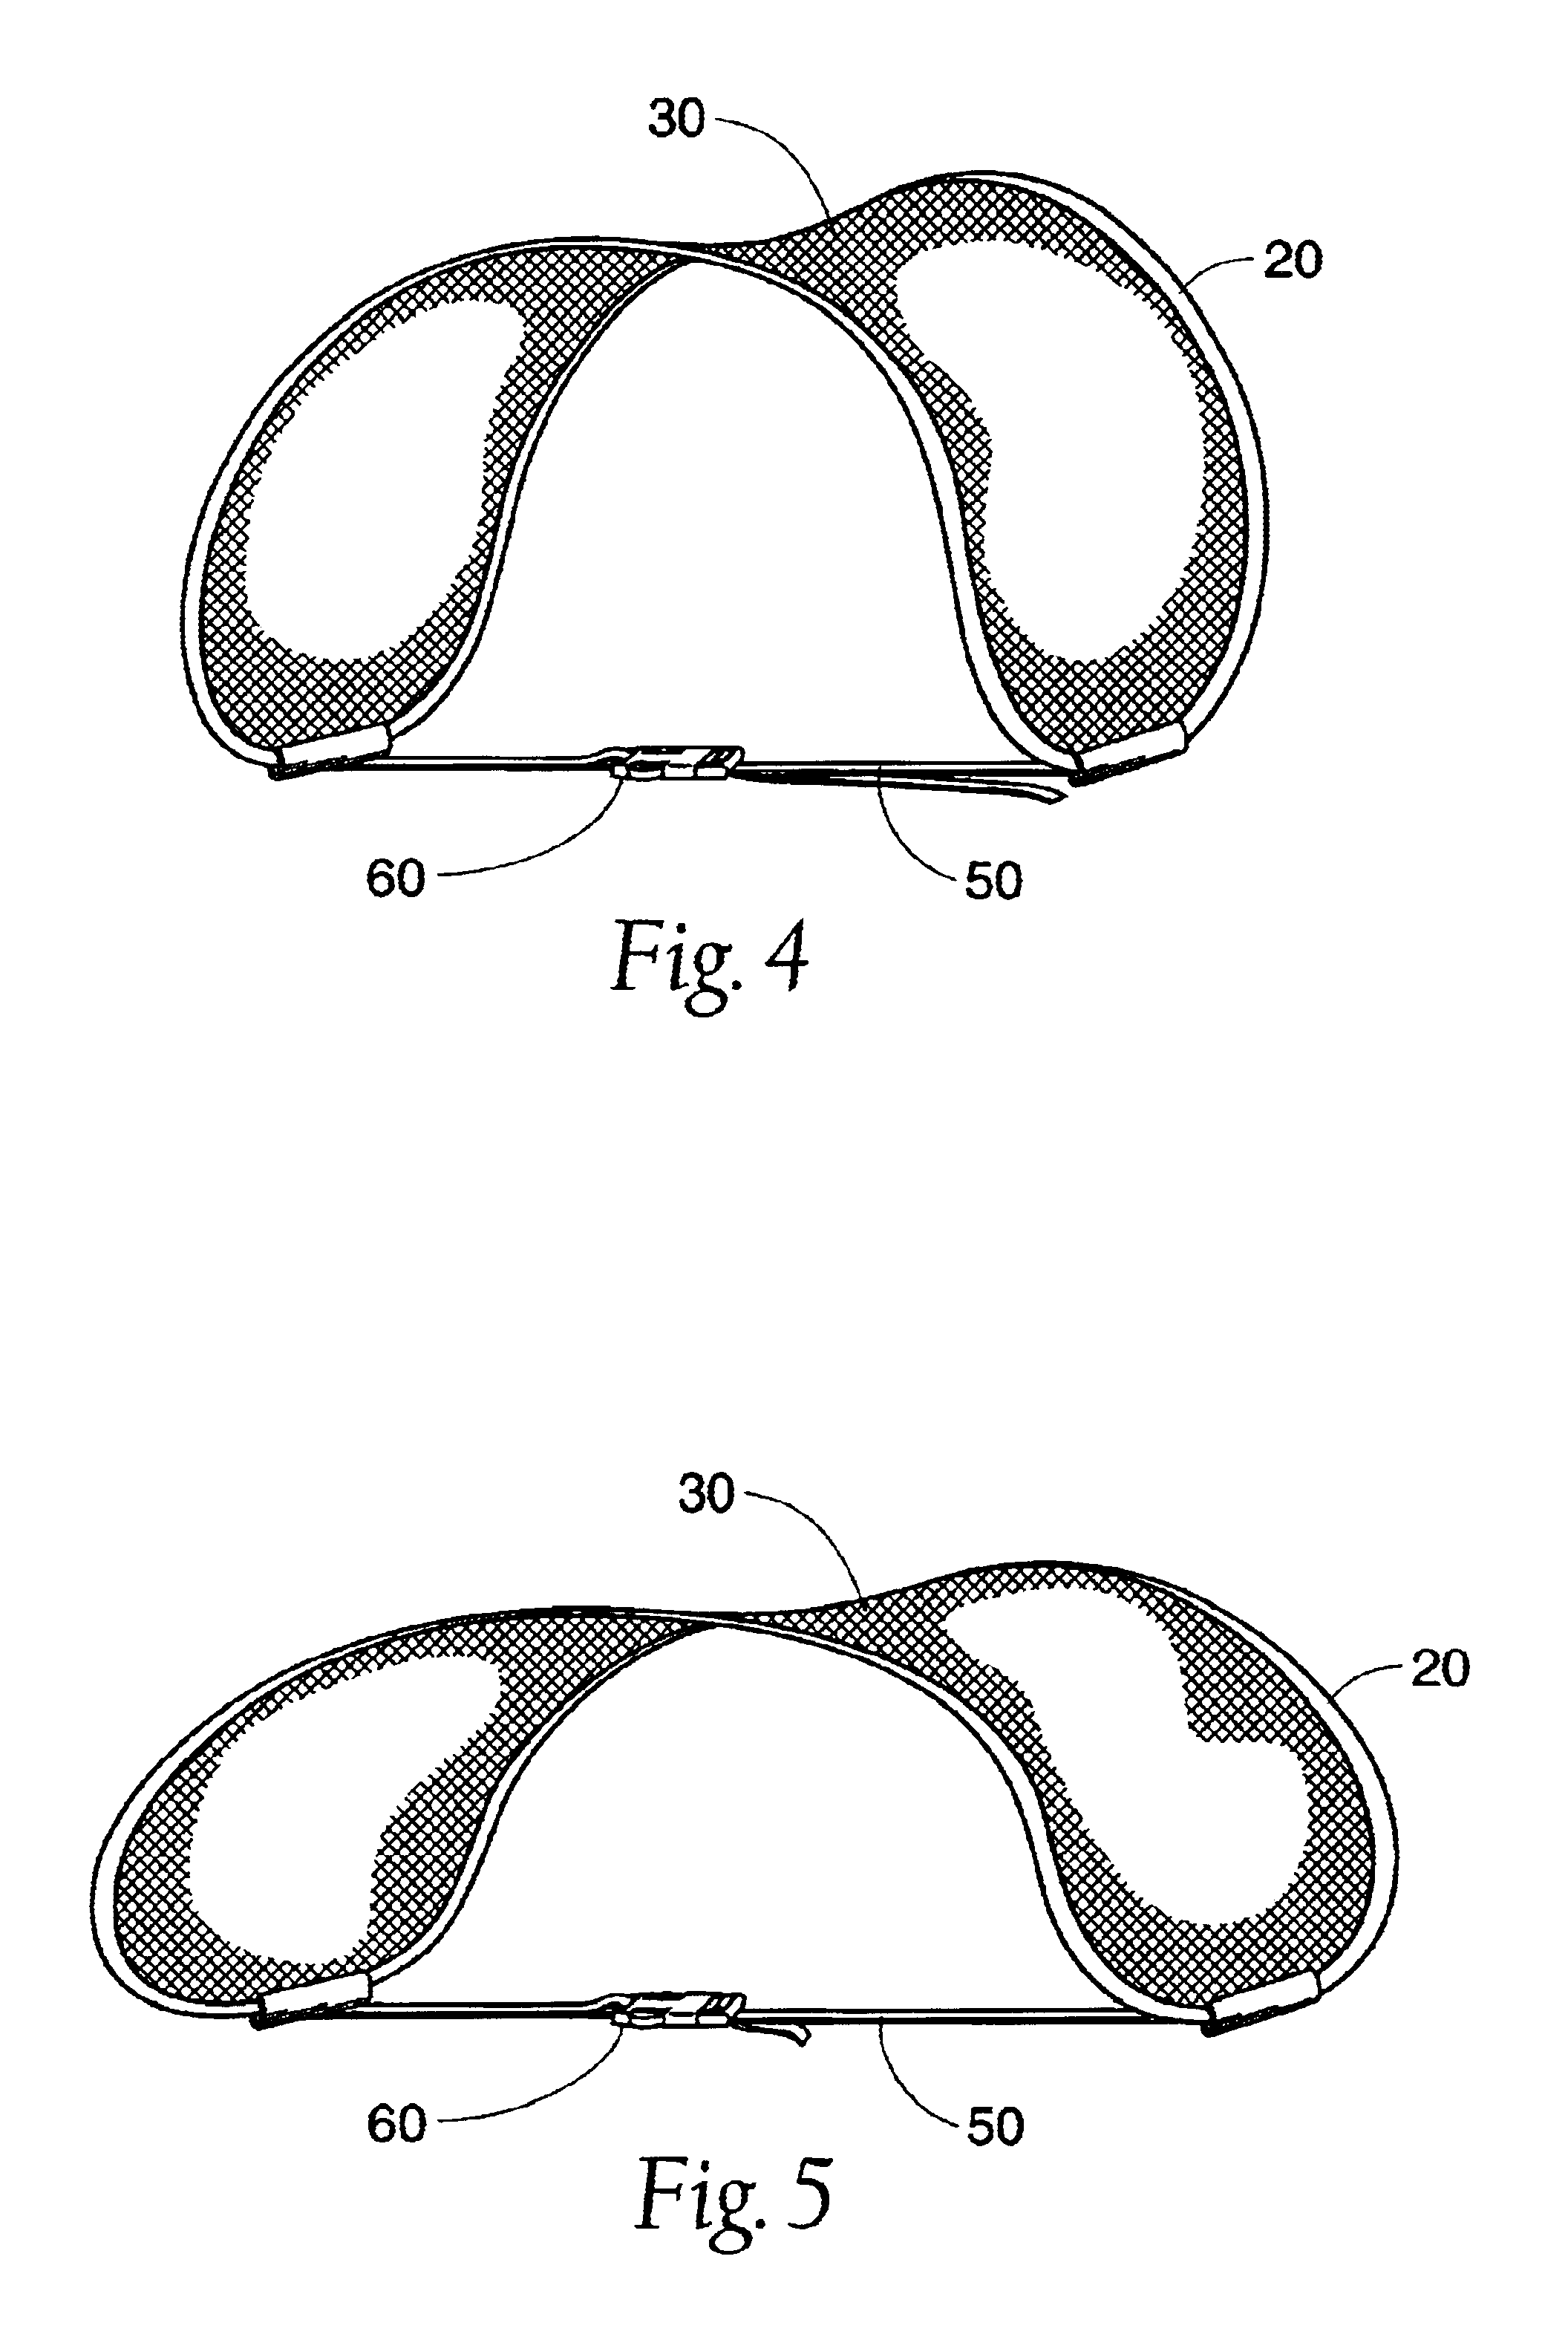 Collapsible drying apparatus and method for forming and collapsing said apparatus